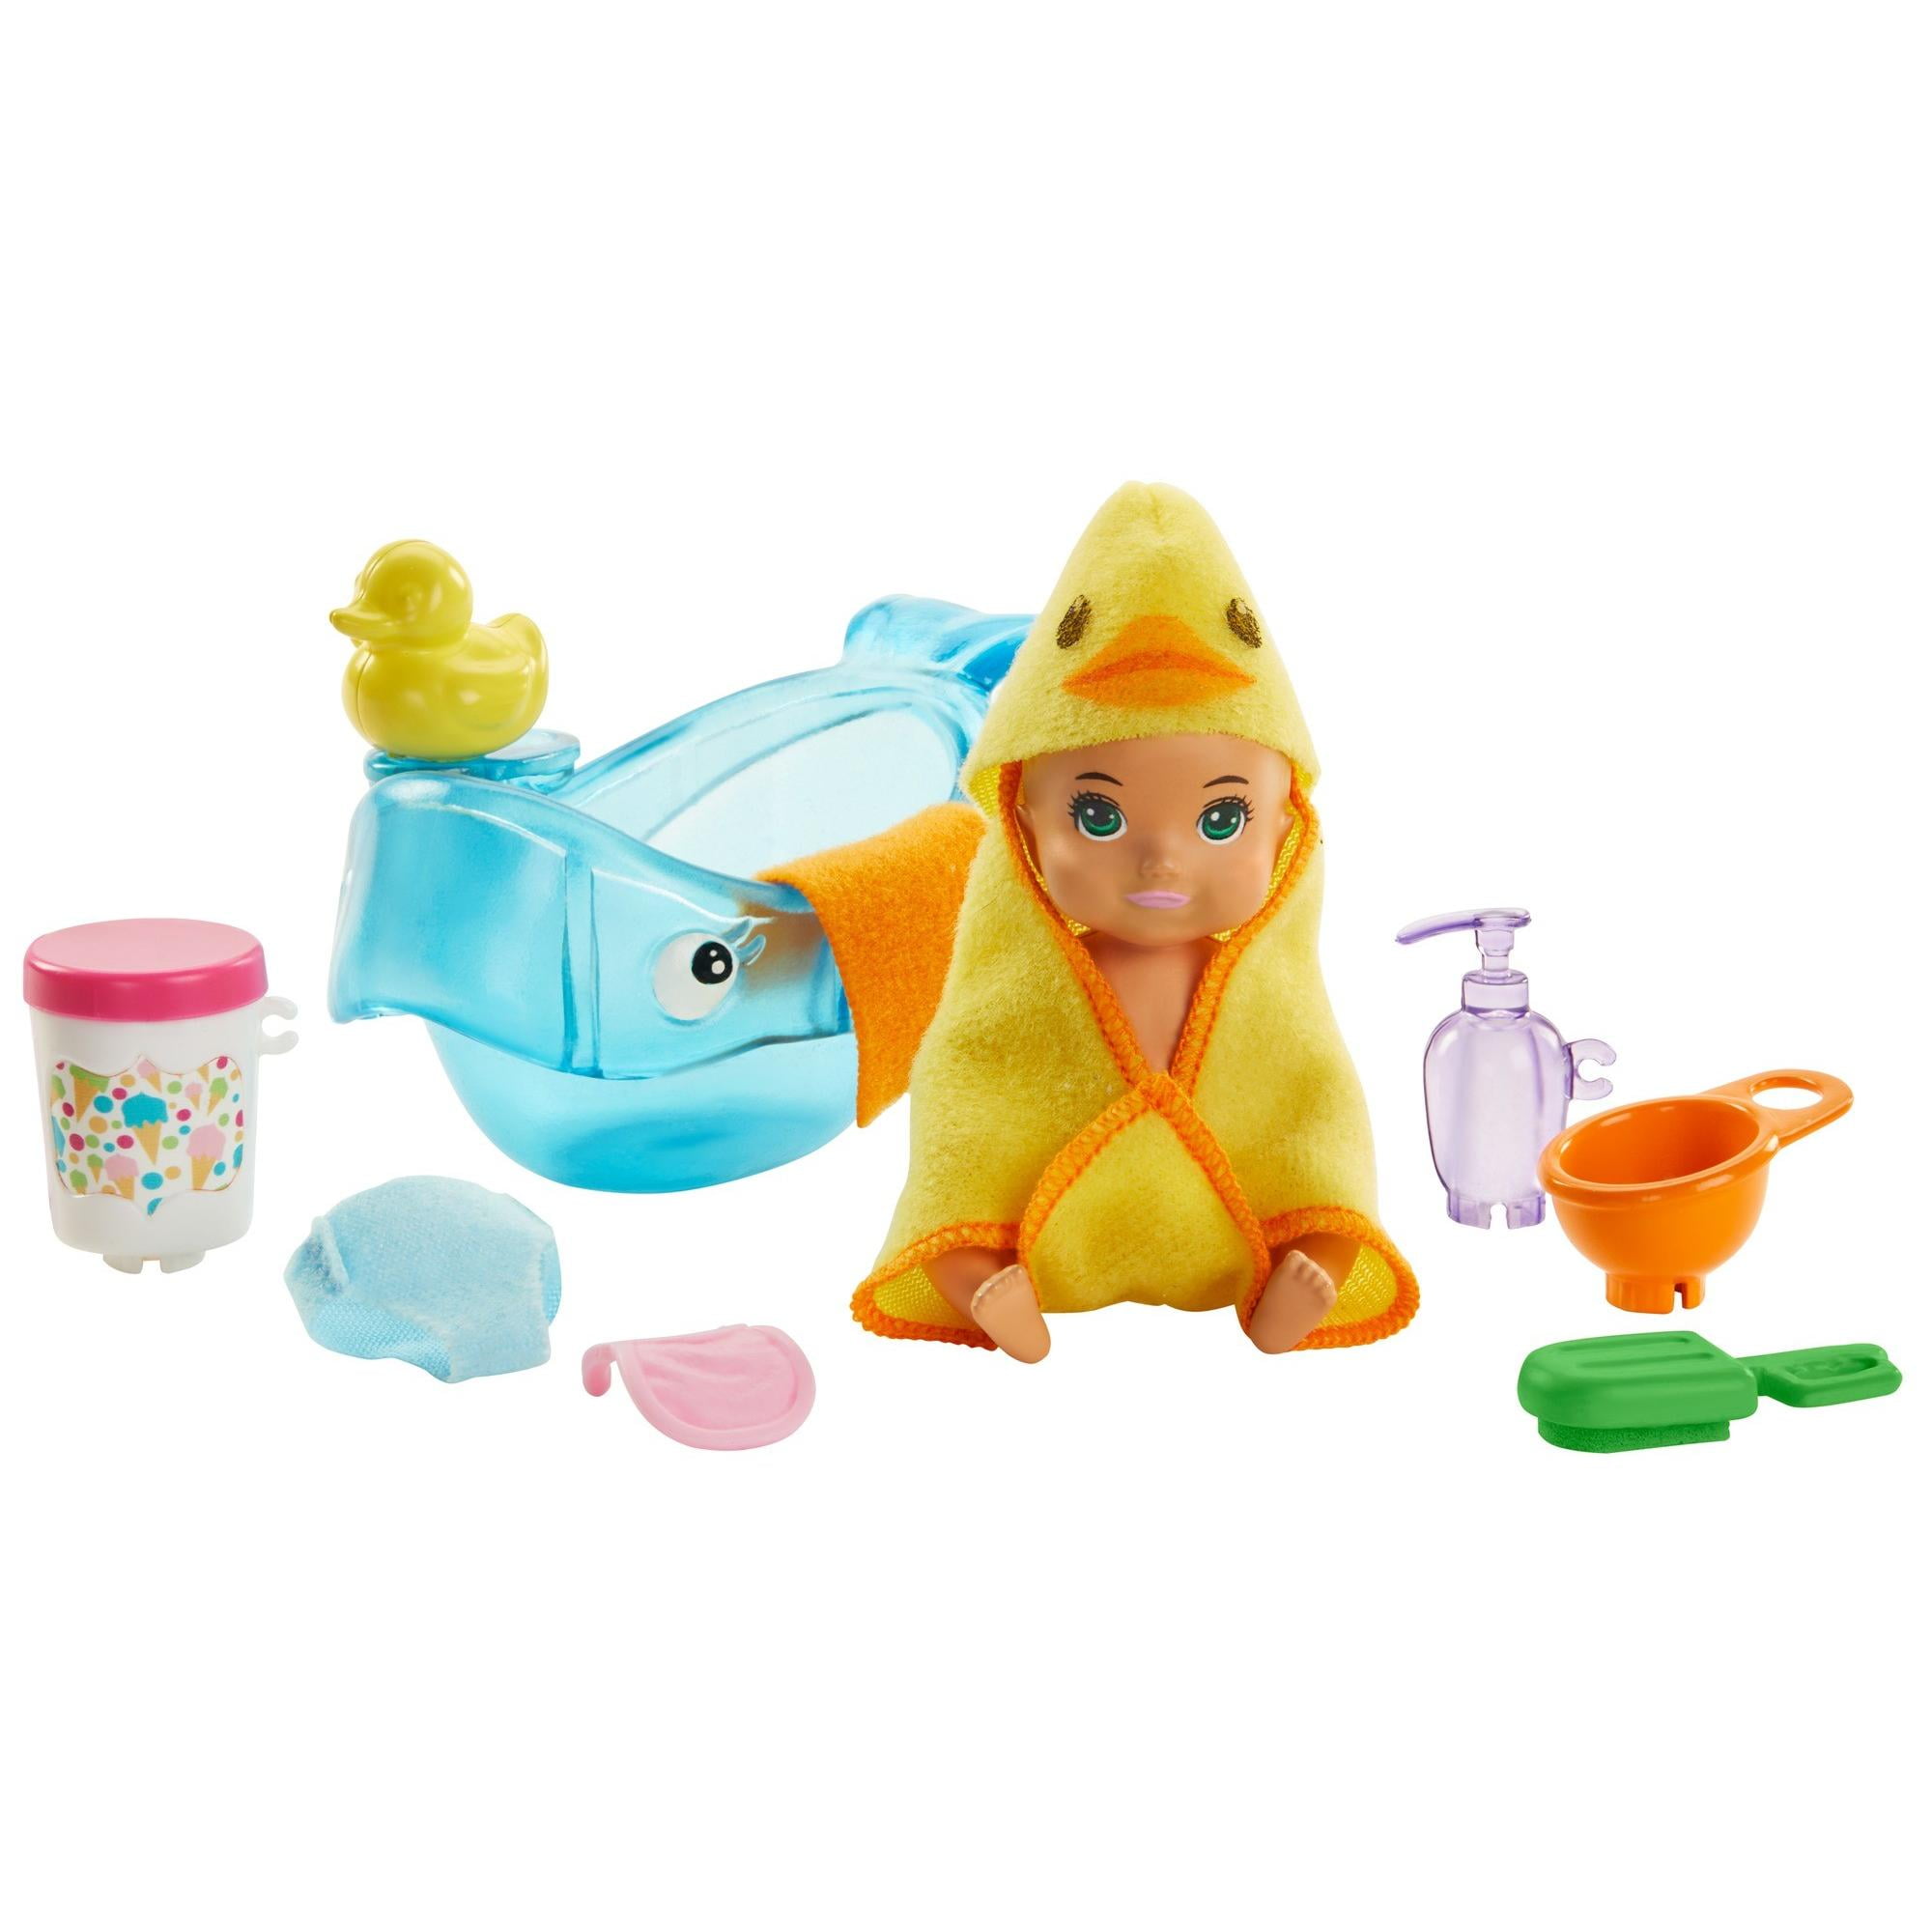 Skipper Babysitters Feeding and Bath-Time Playset With Color-Change Tub and 6 Accessories - Walmart.com